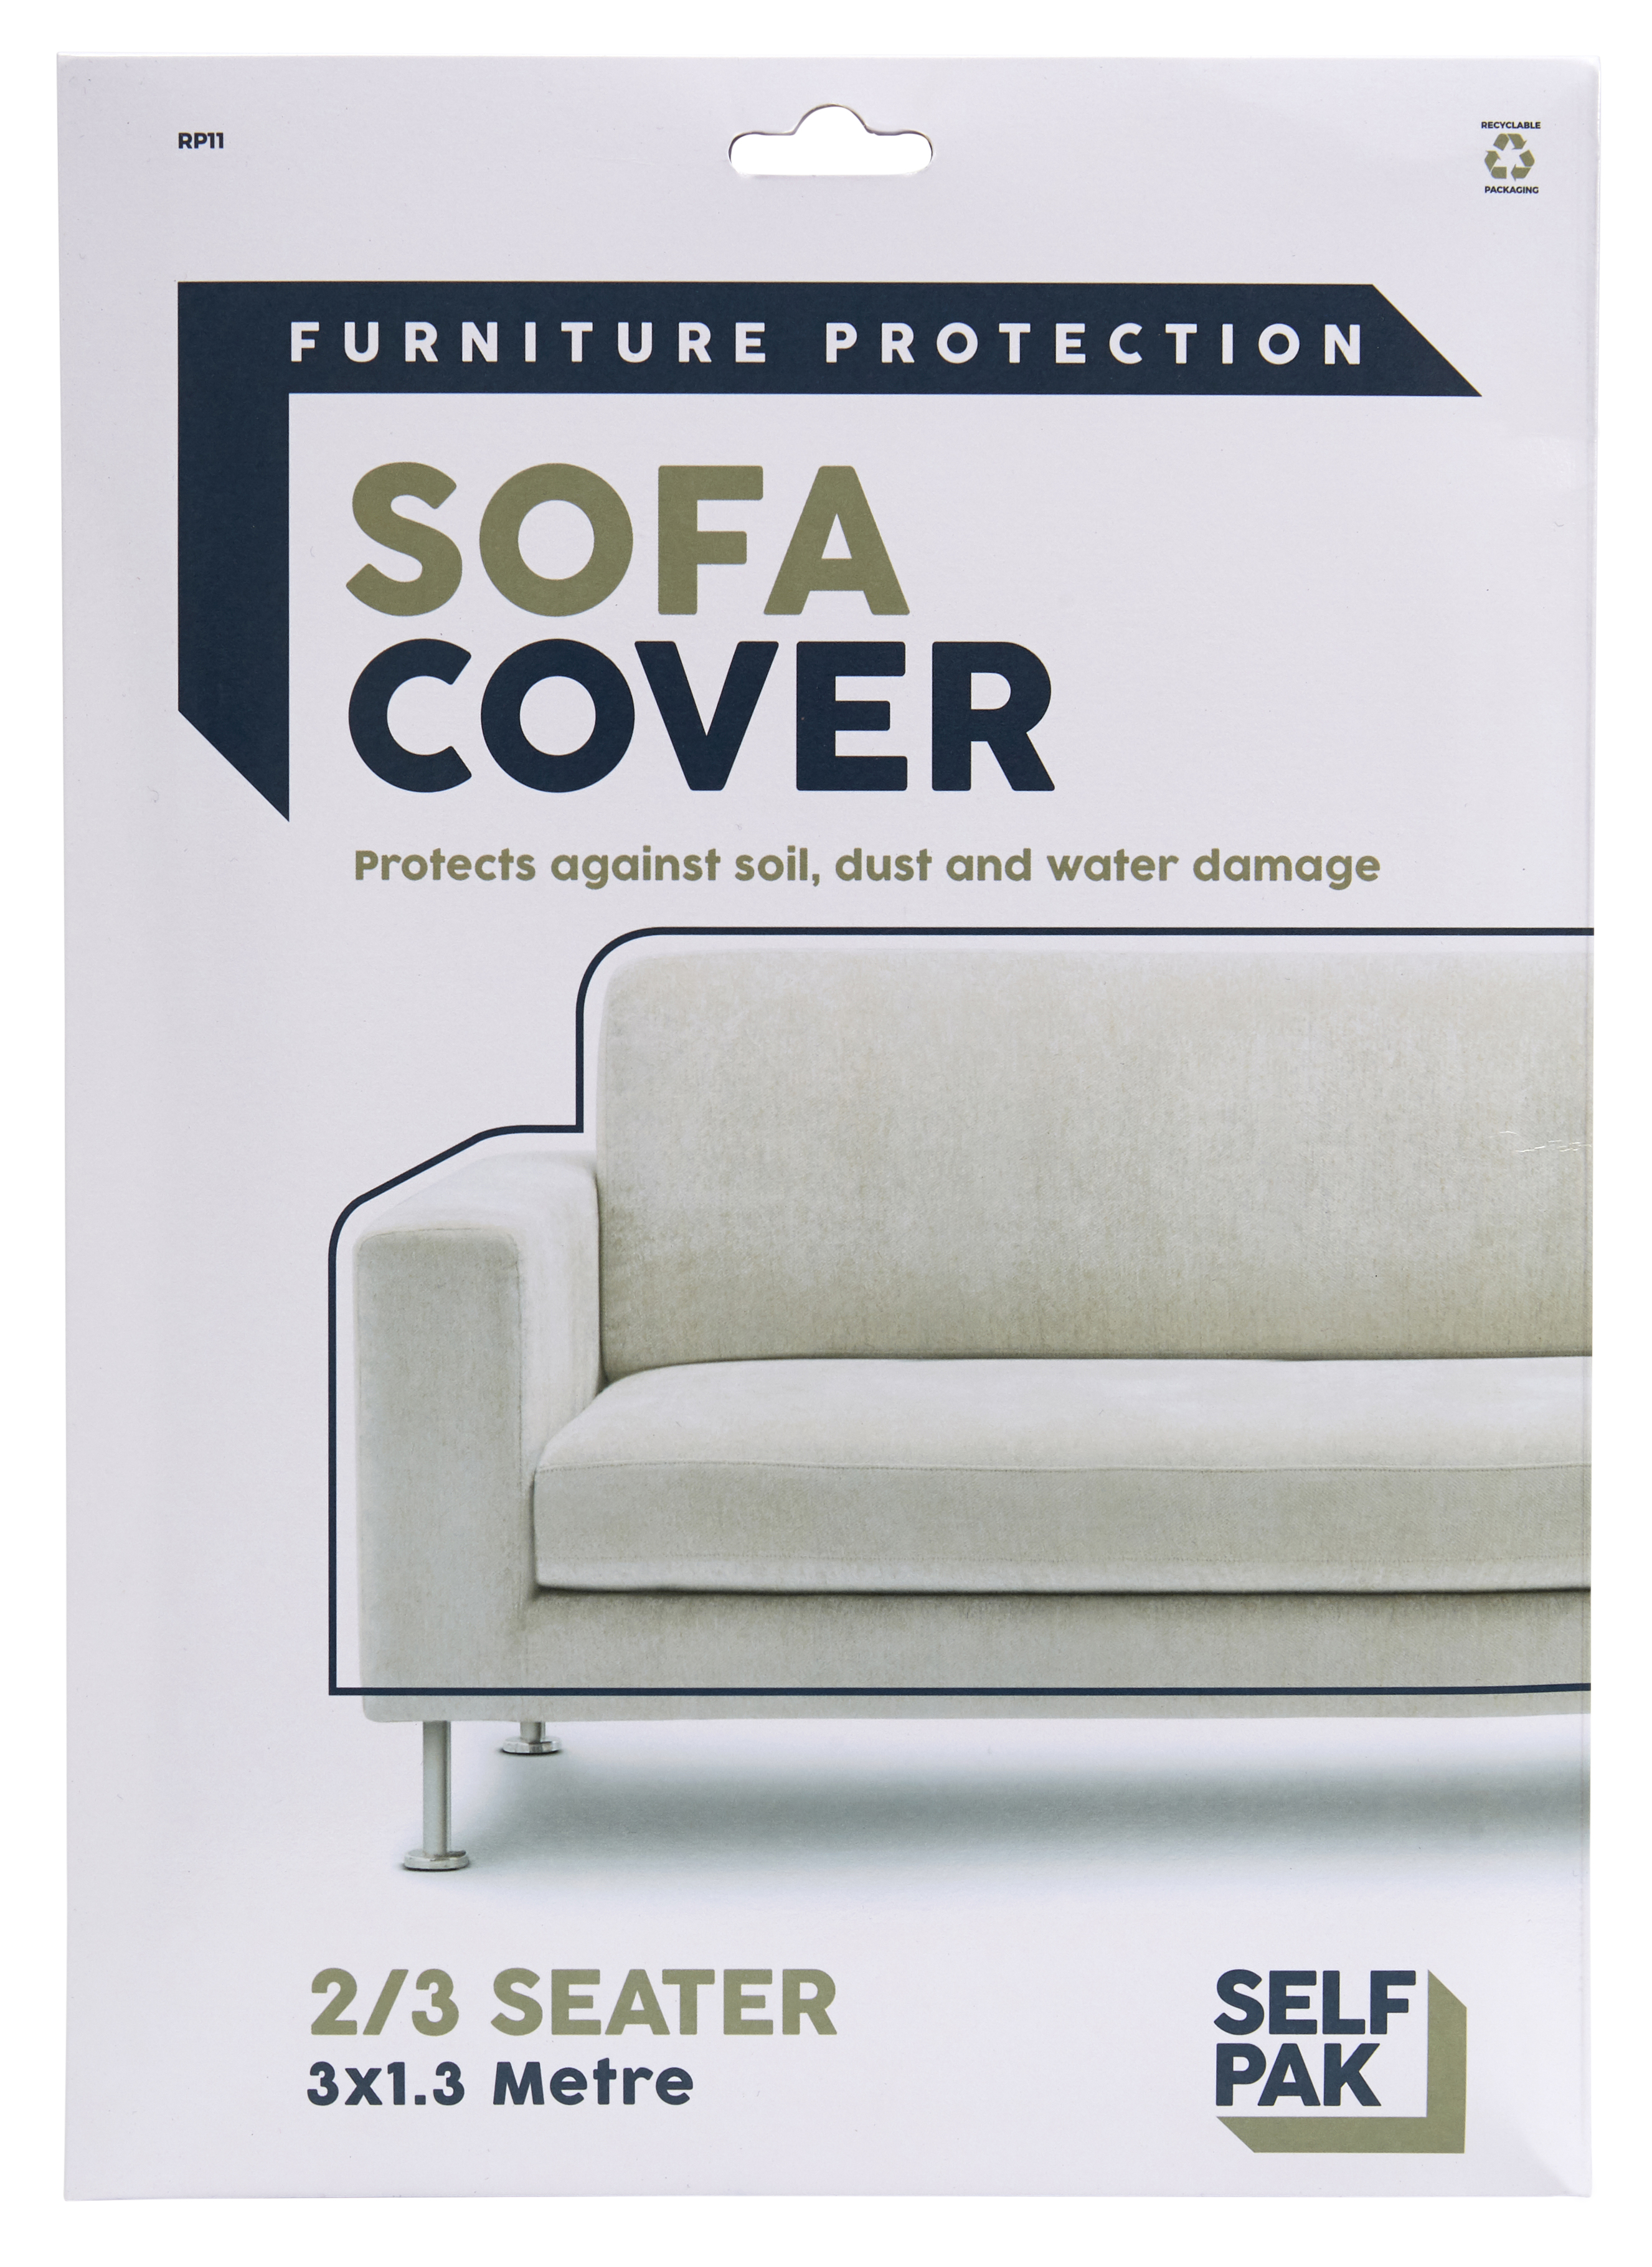 Sofa Covers & Protection